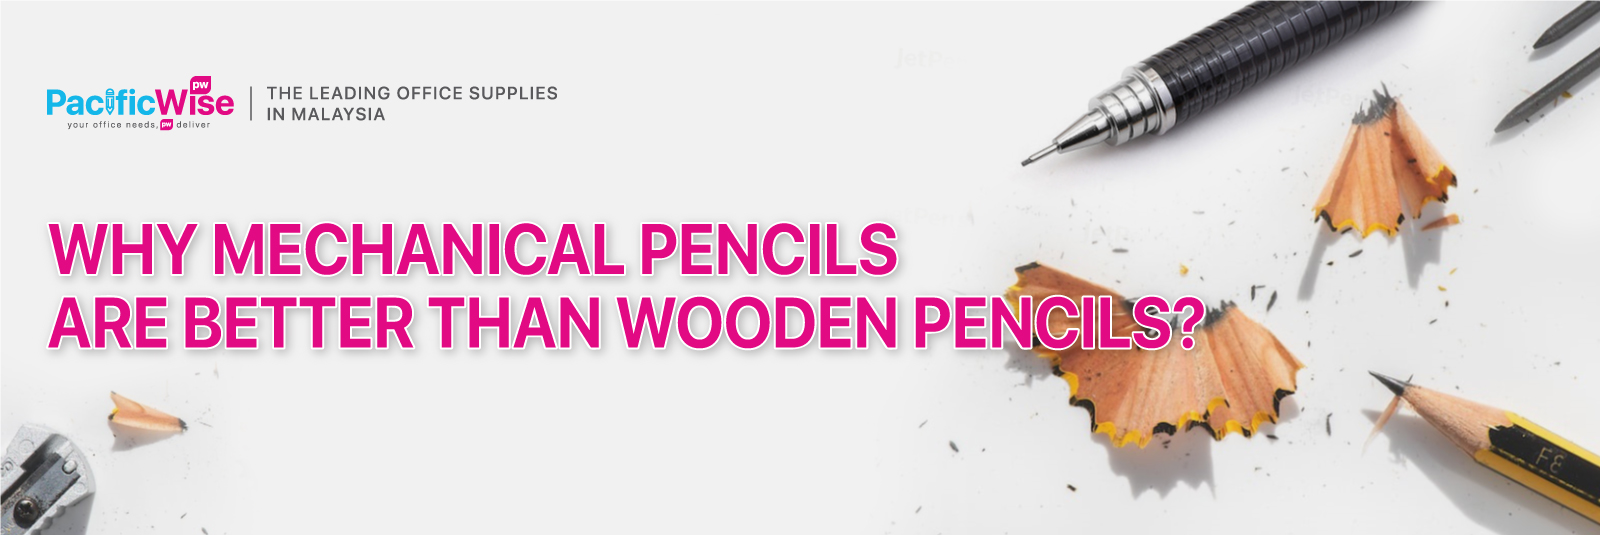 Why Mechanical Pencils Are Better Than Wooden Pencils